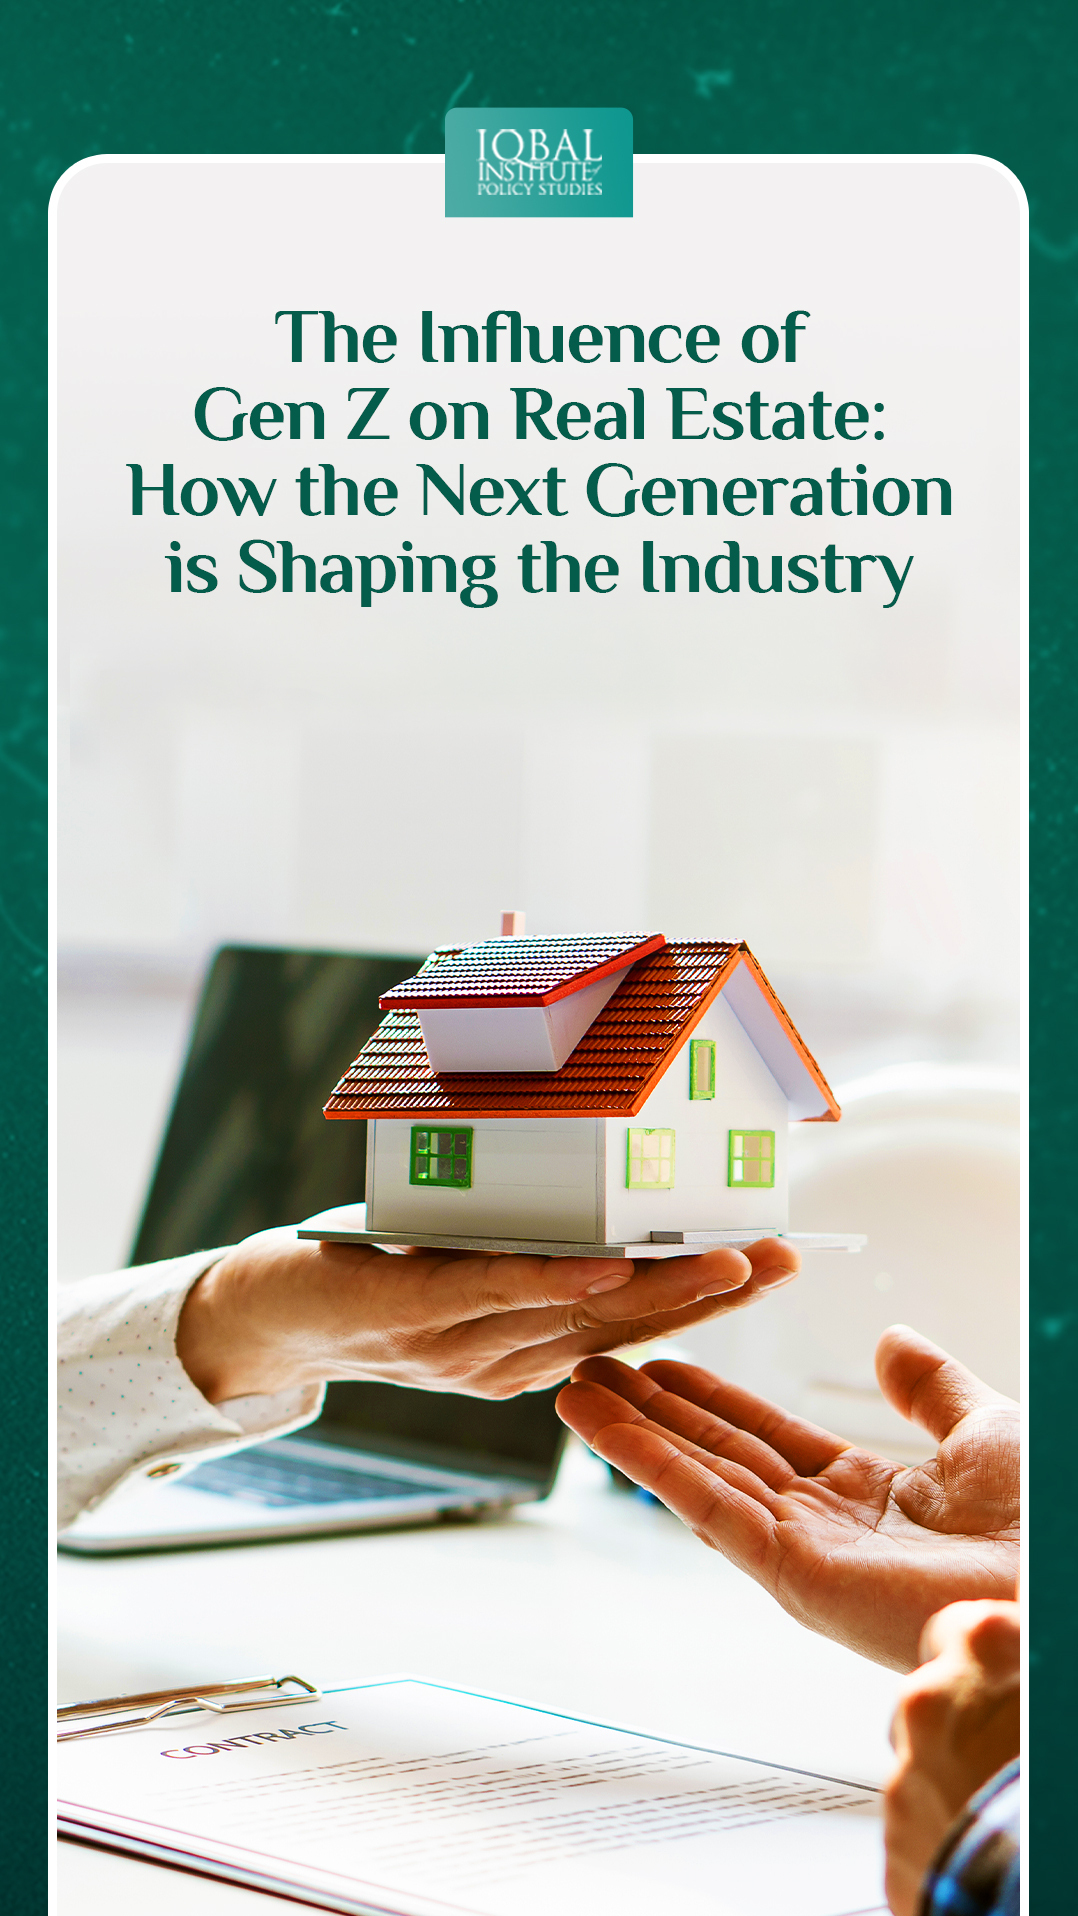 The Influence of Gen Z on Real Estate: How the Next Generation is Shaping the Industry